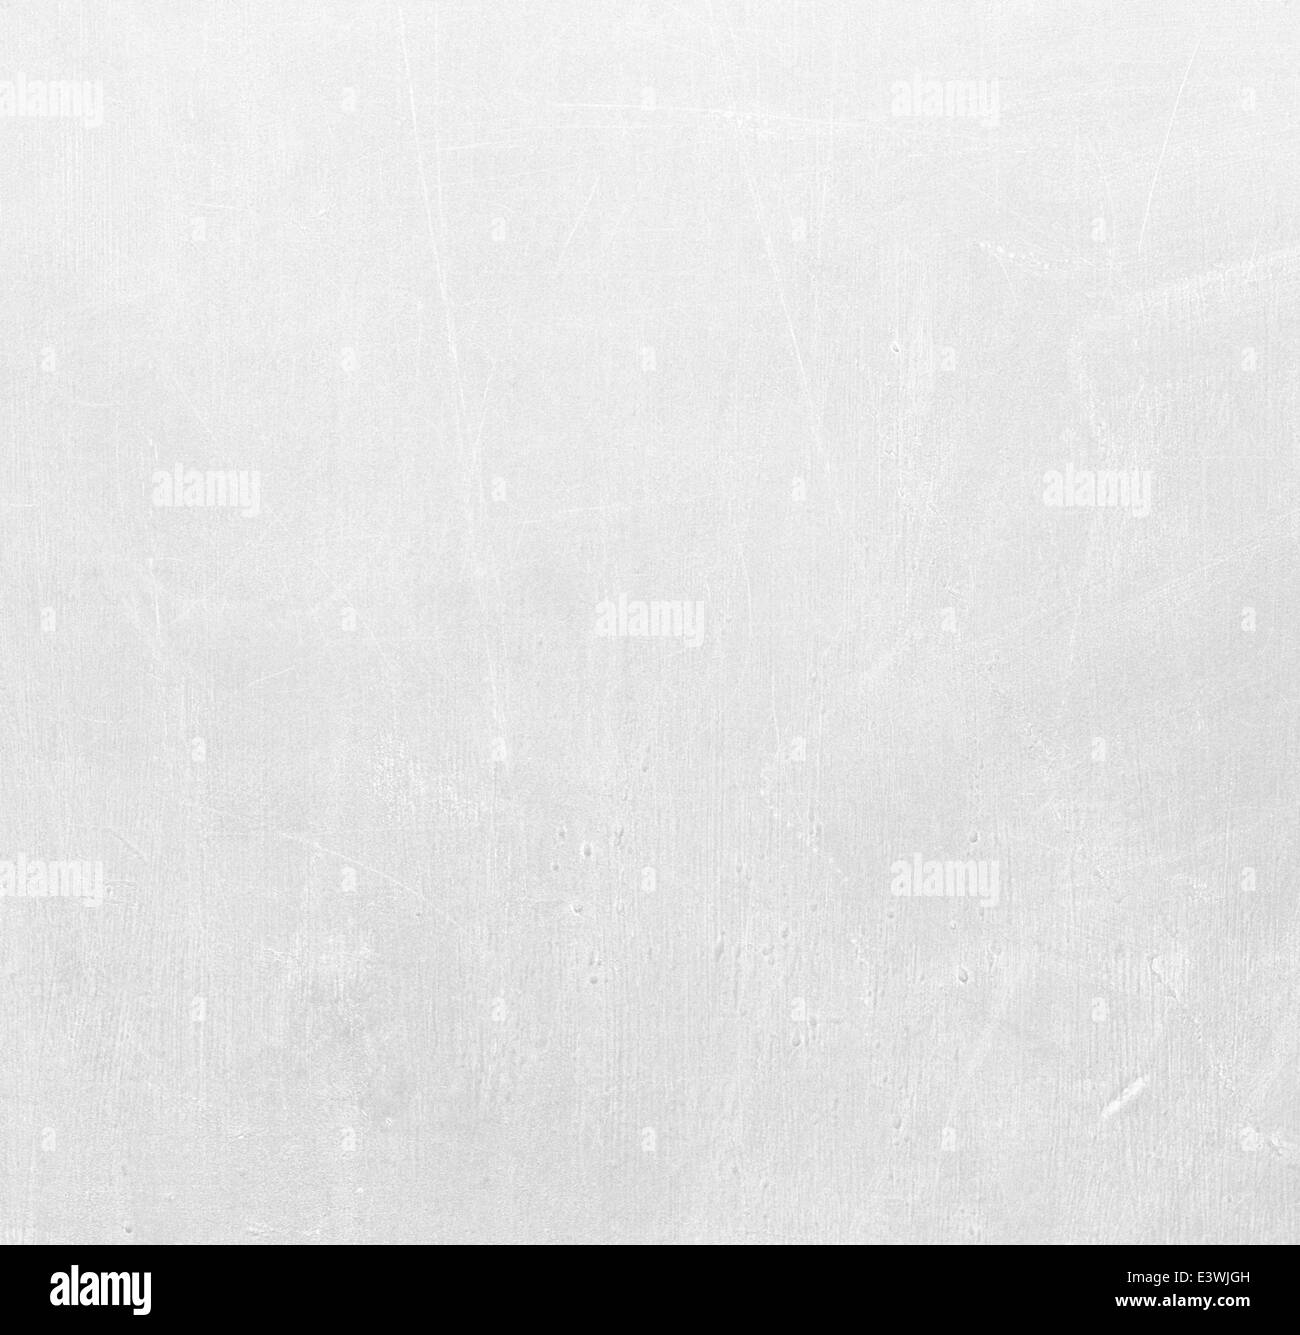 clean chalkboard surface, textured background Stock Photo